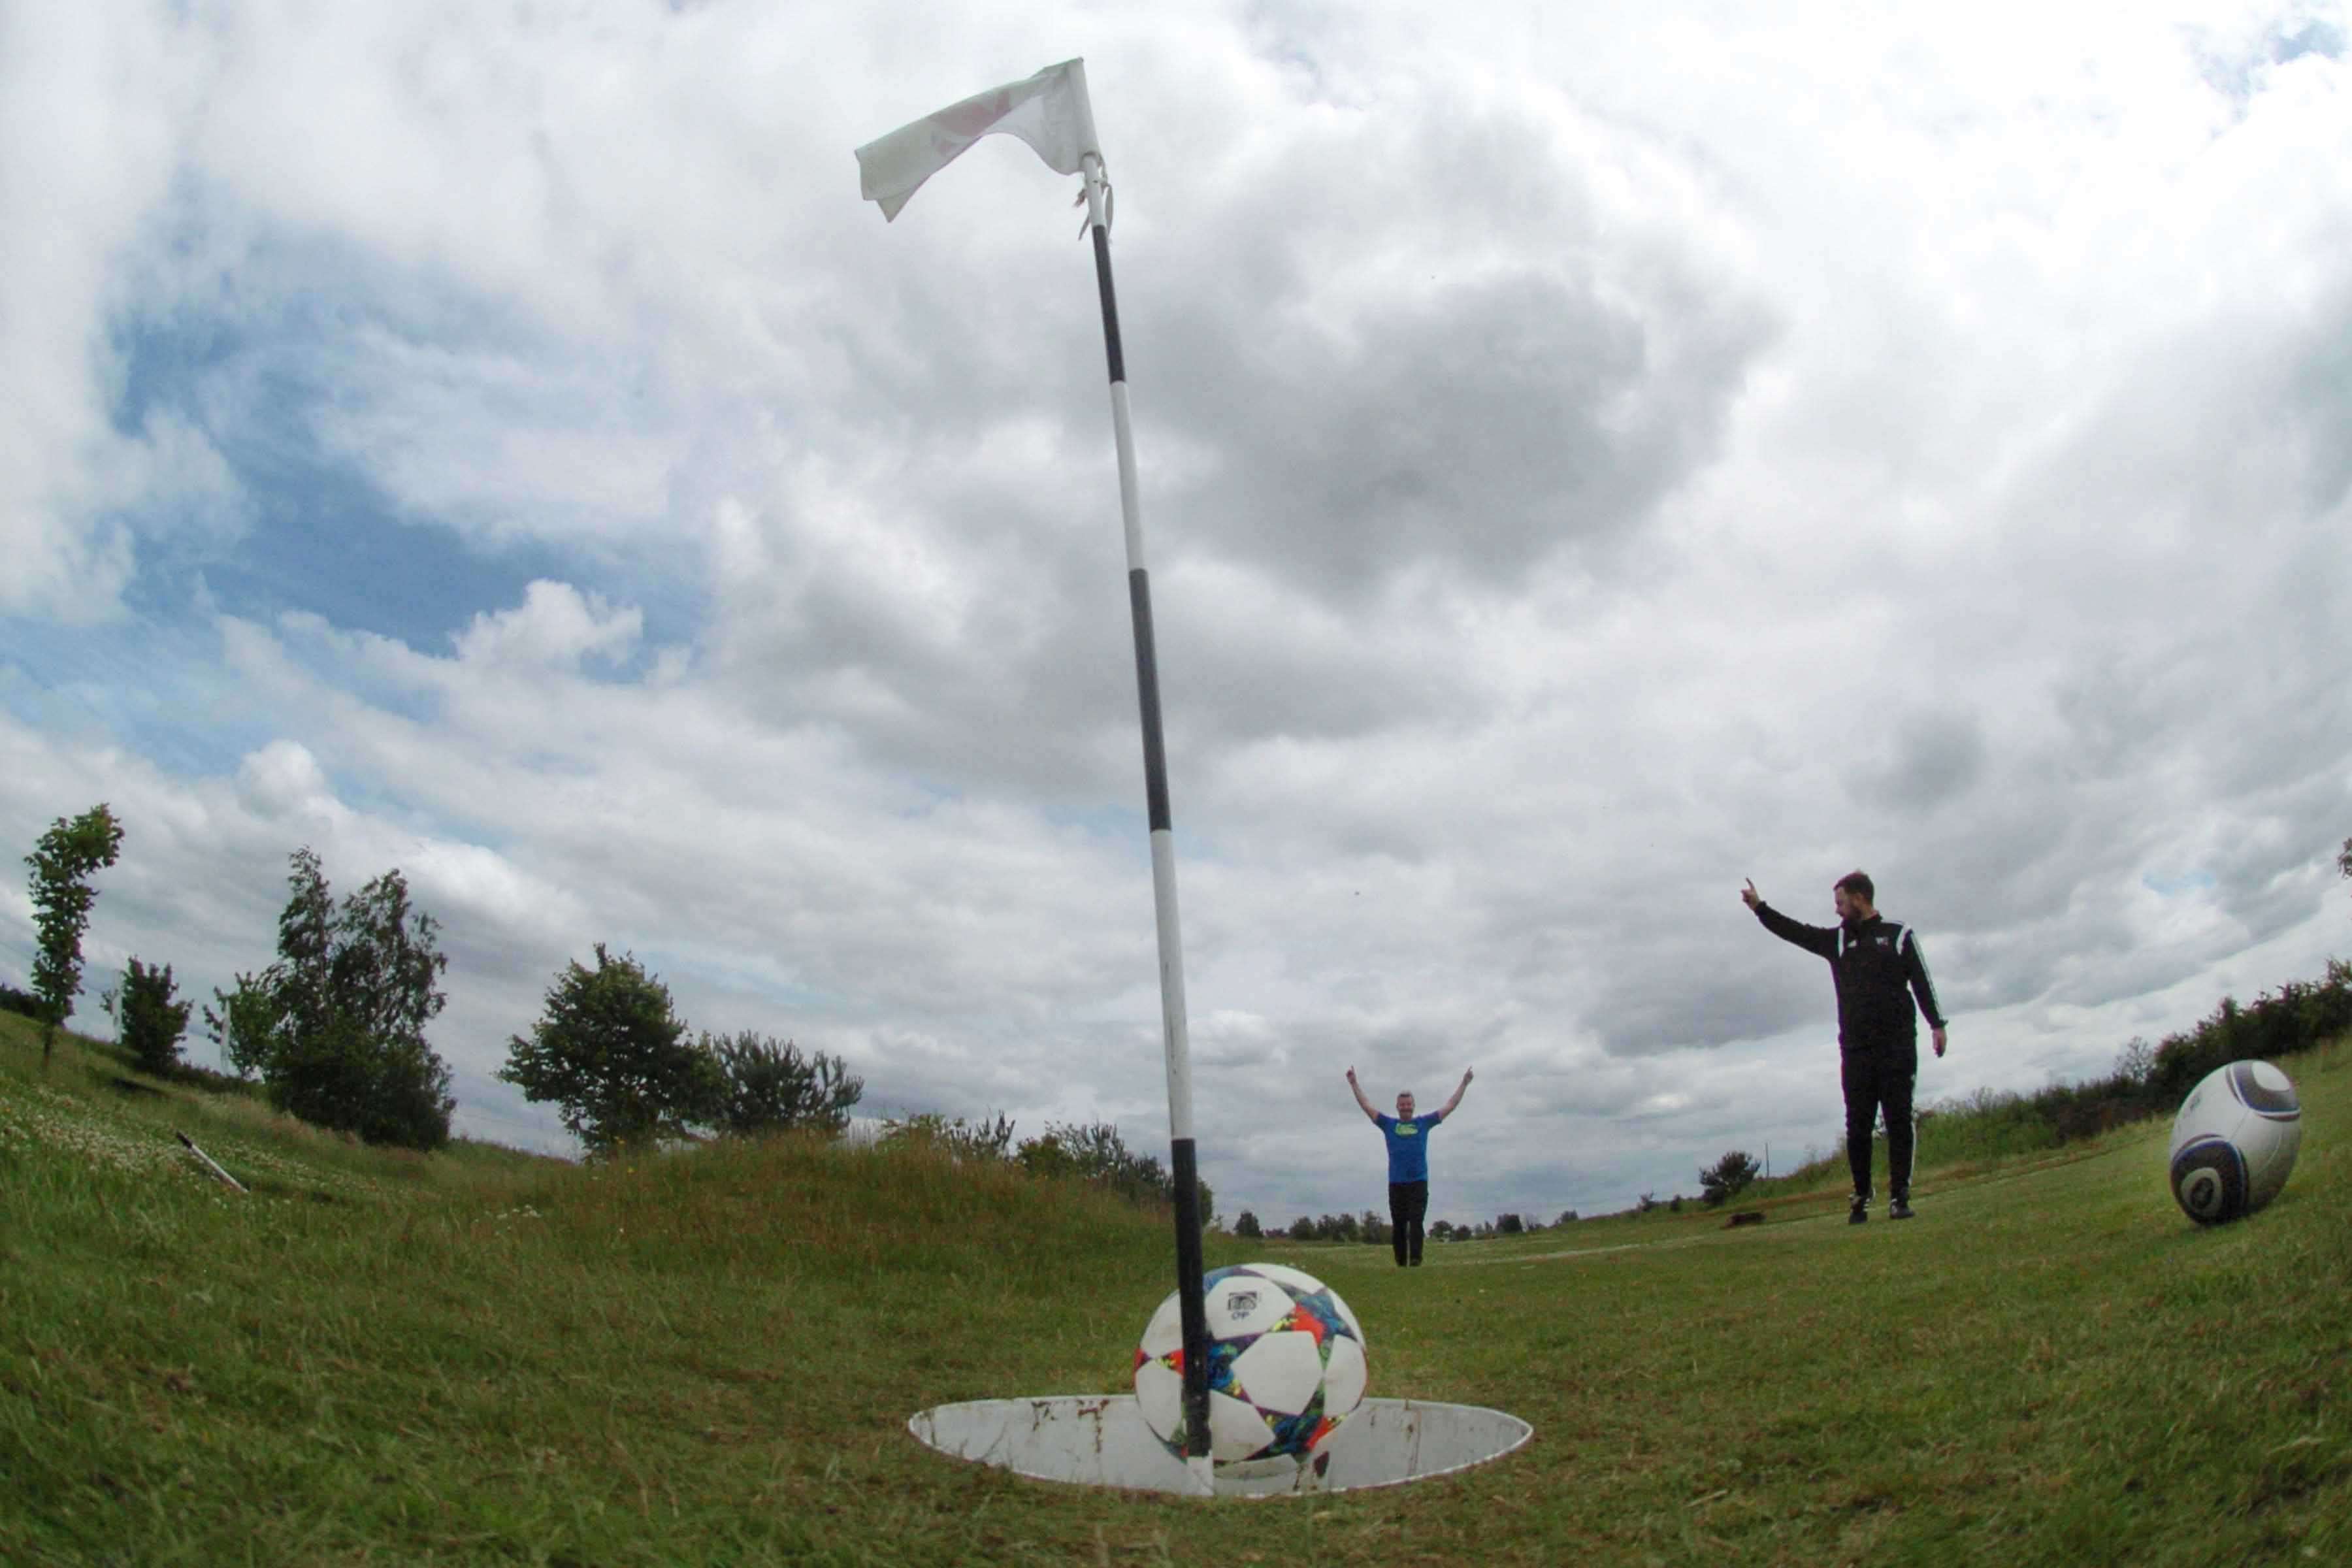 Footgolf is getting more and more popular across the country